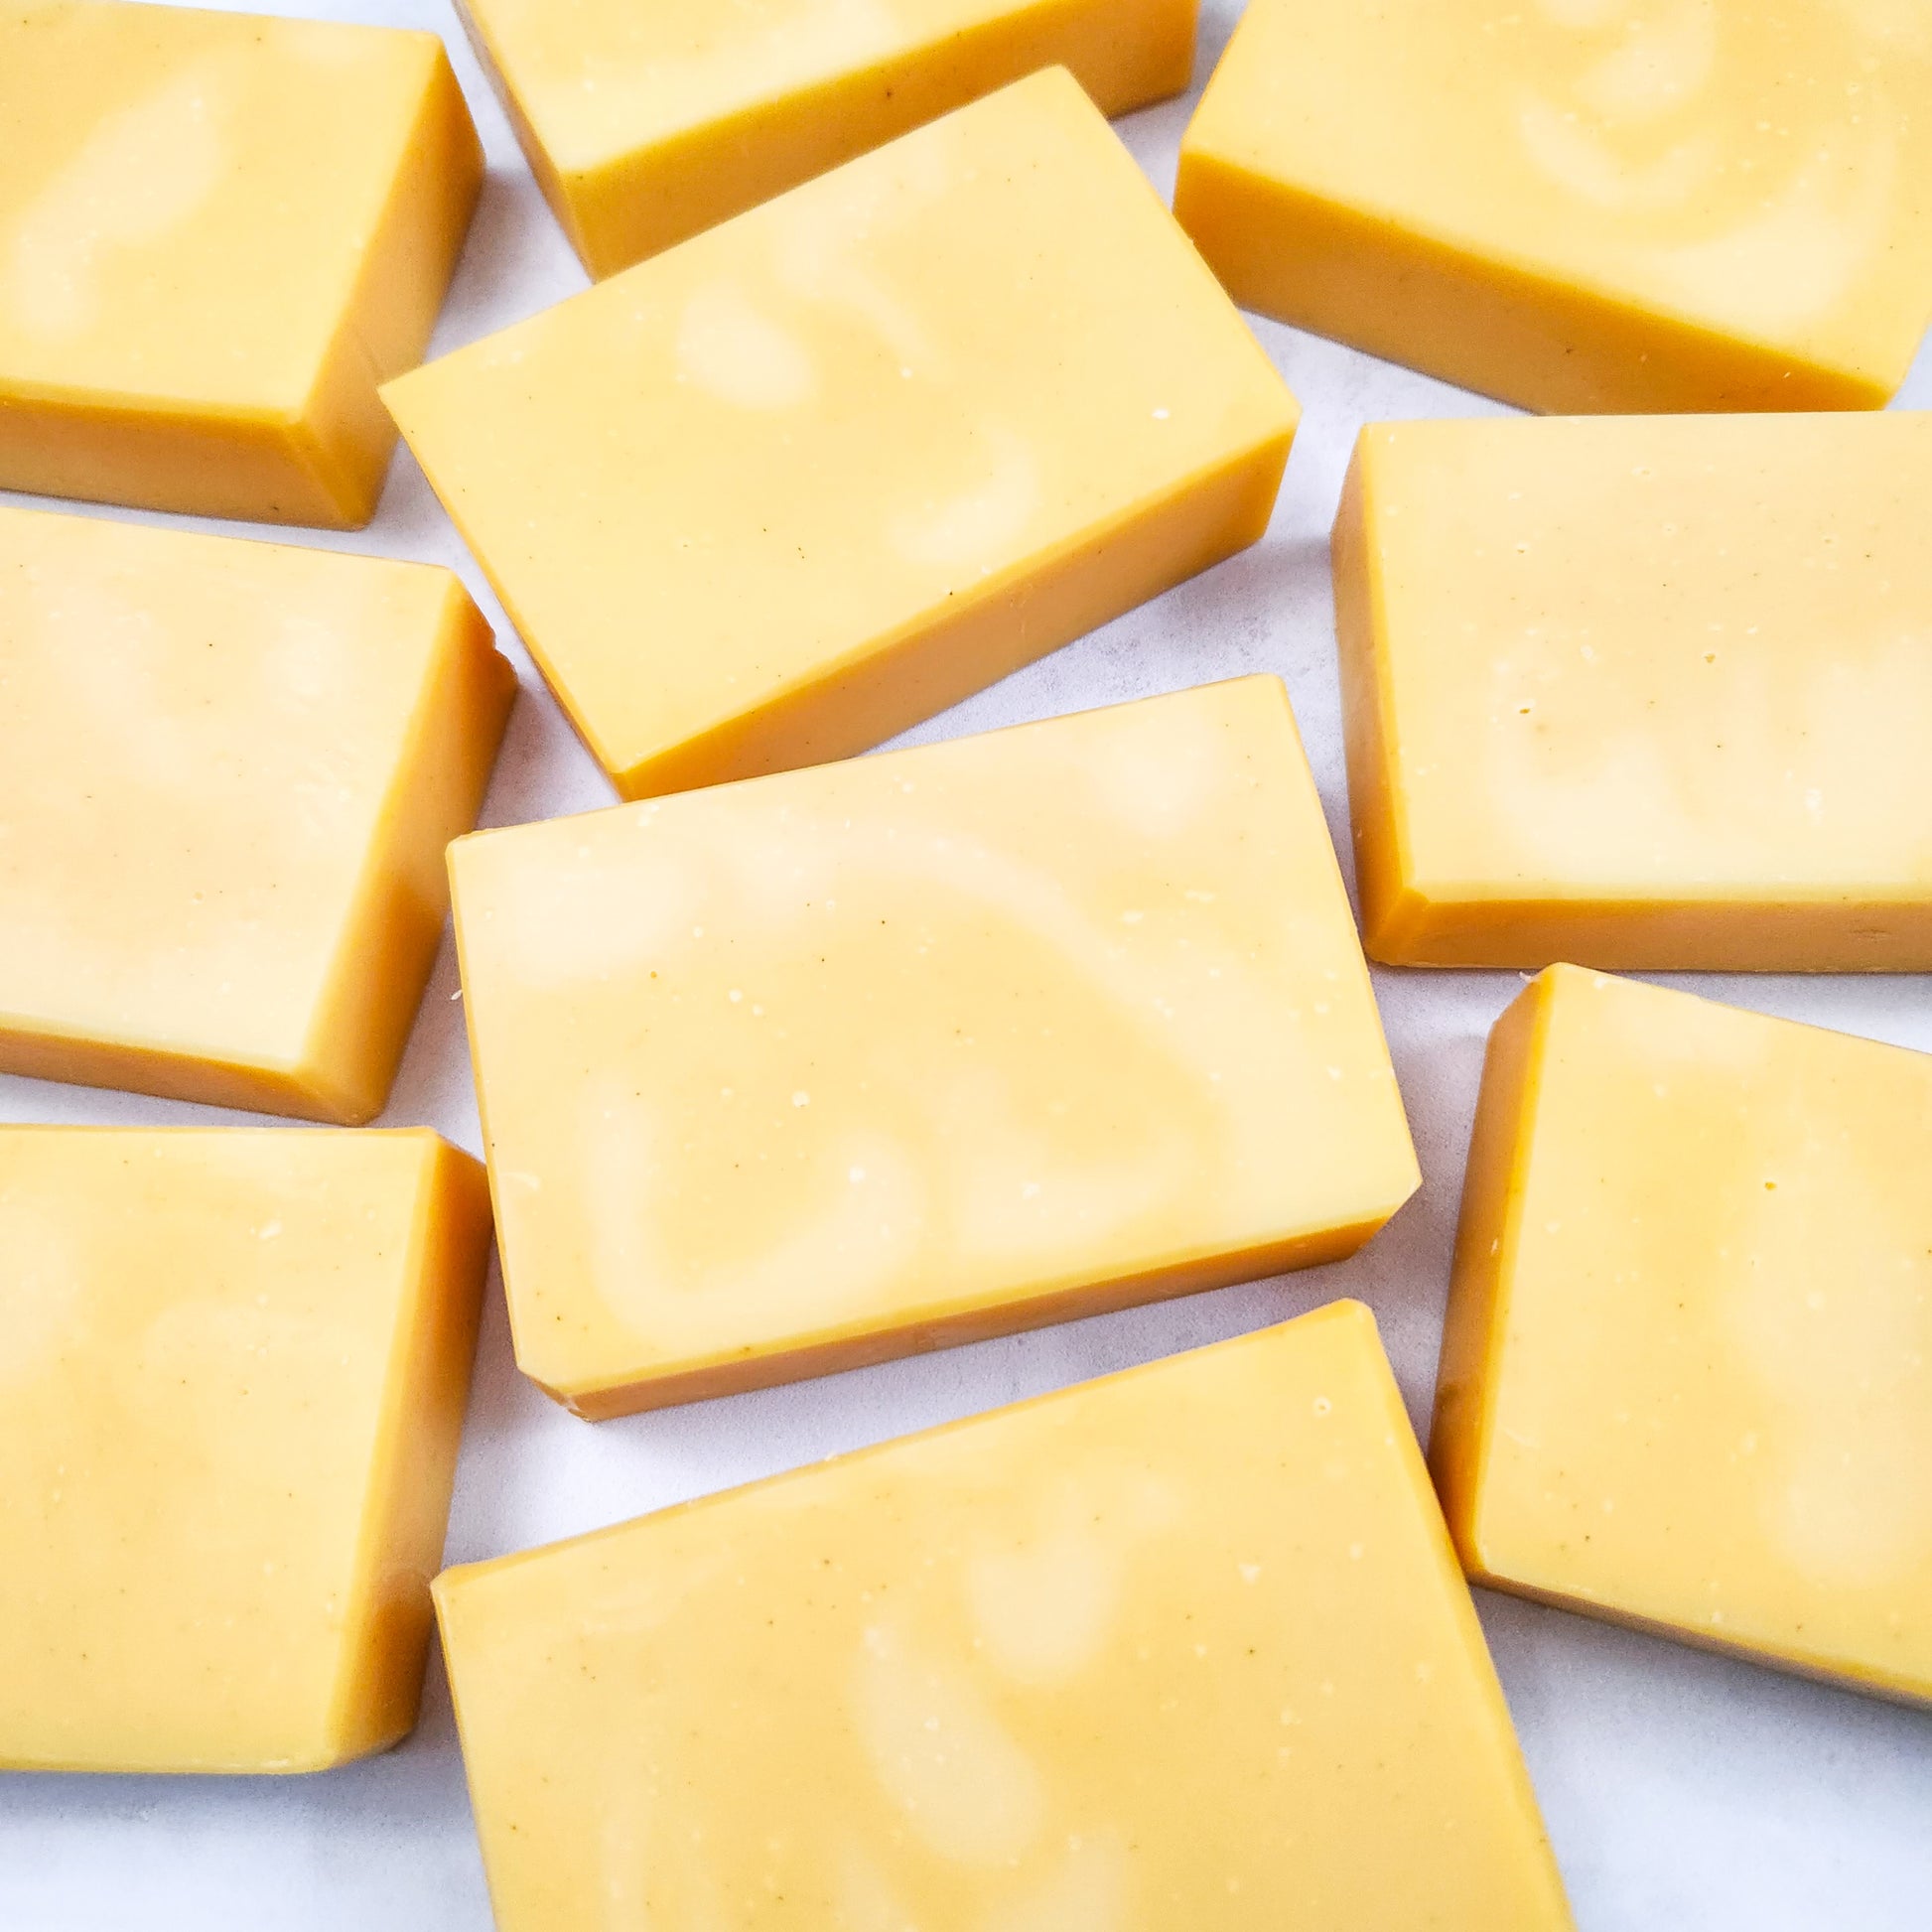 Several bats of yellowish orange soap on a white background